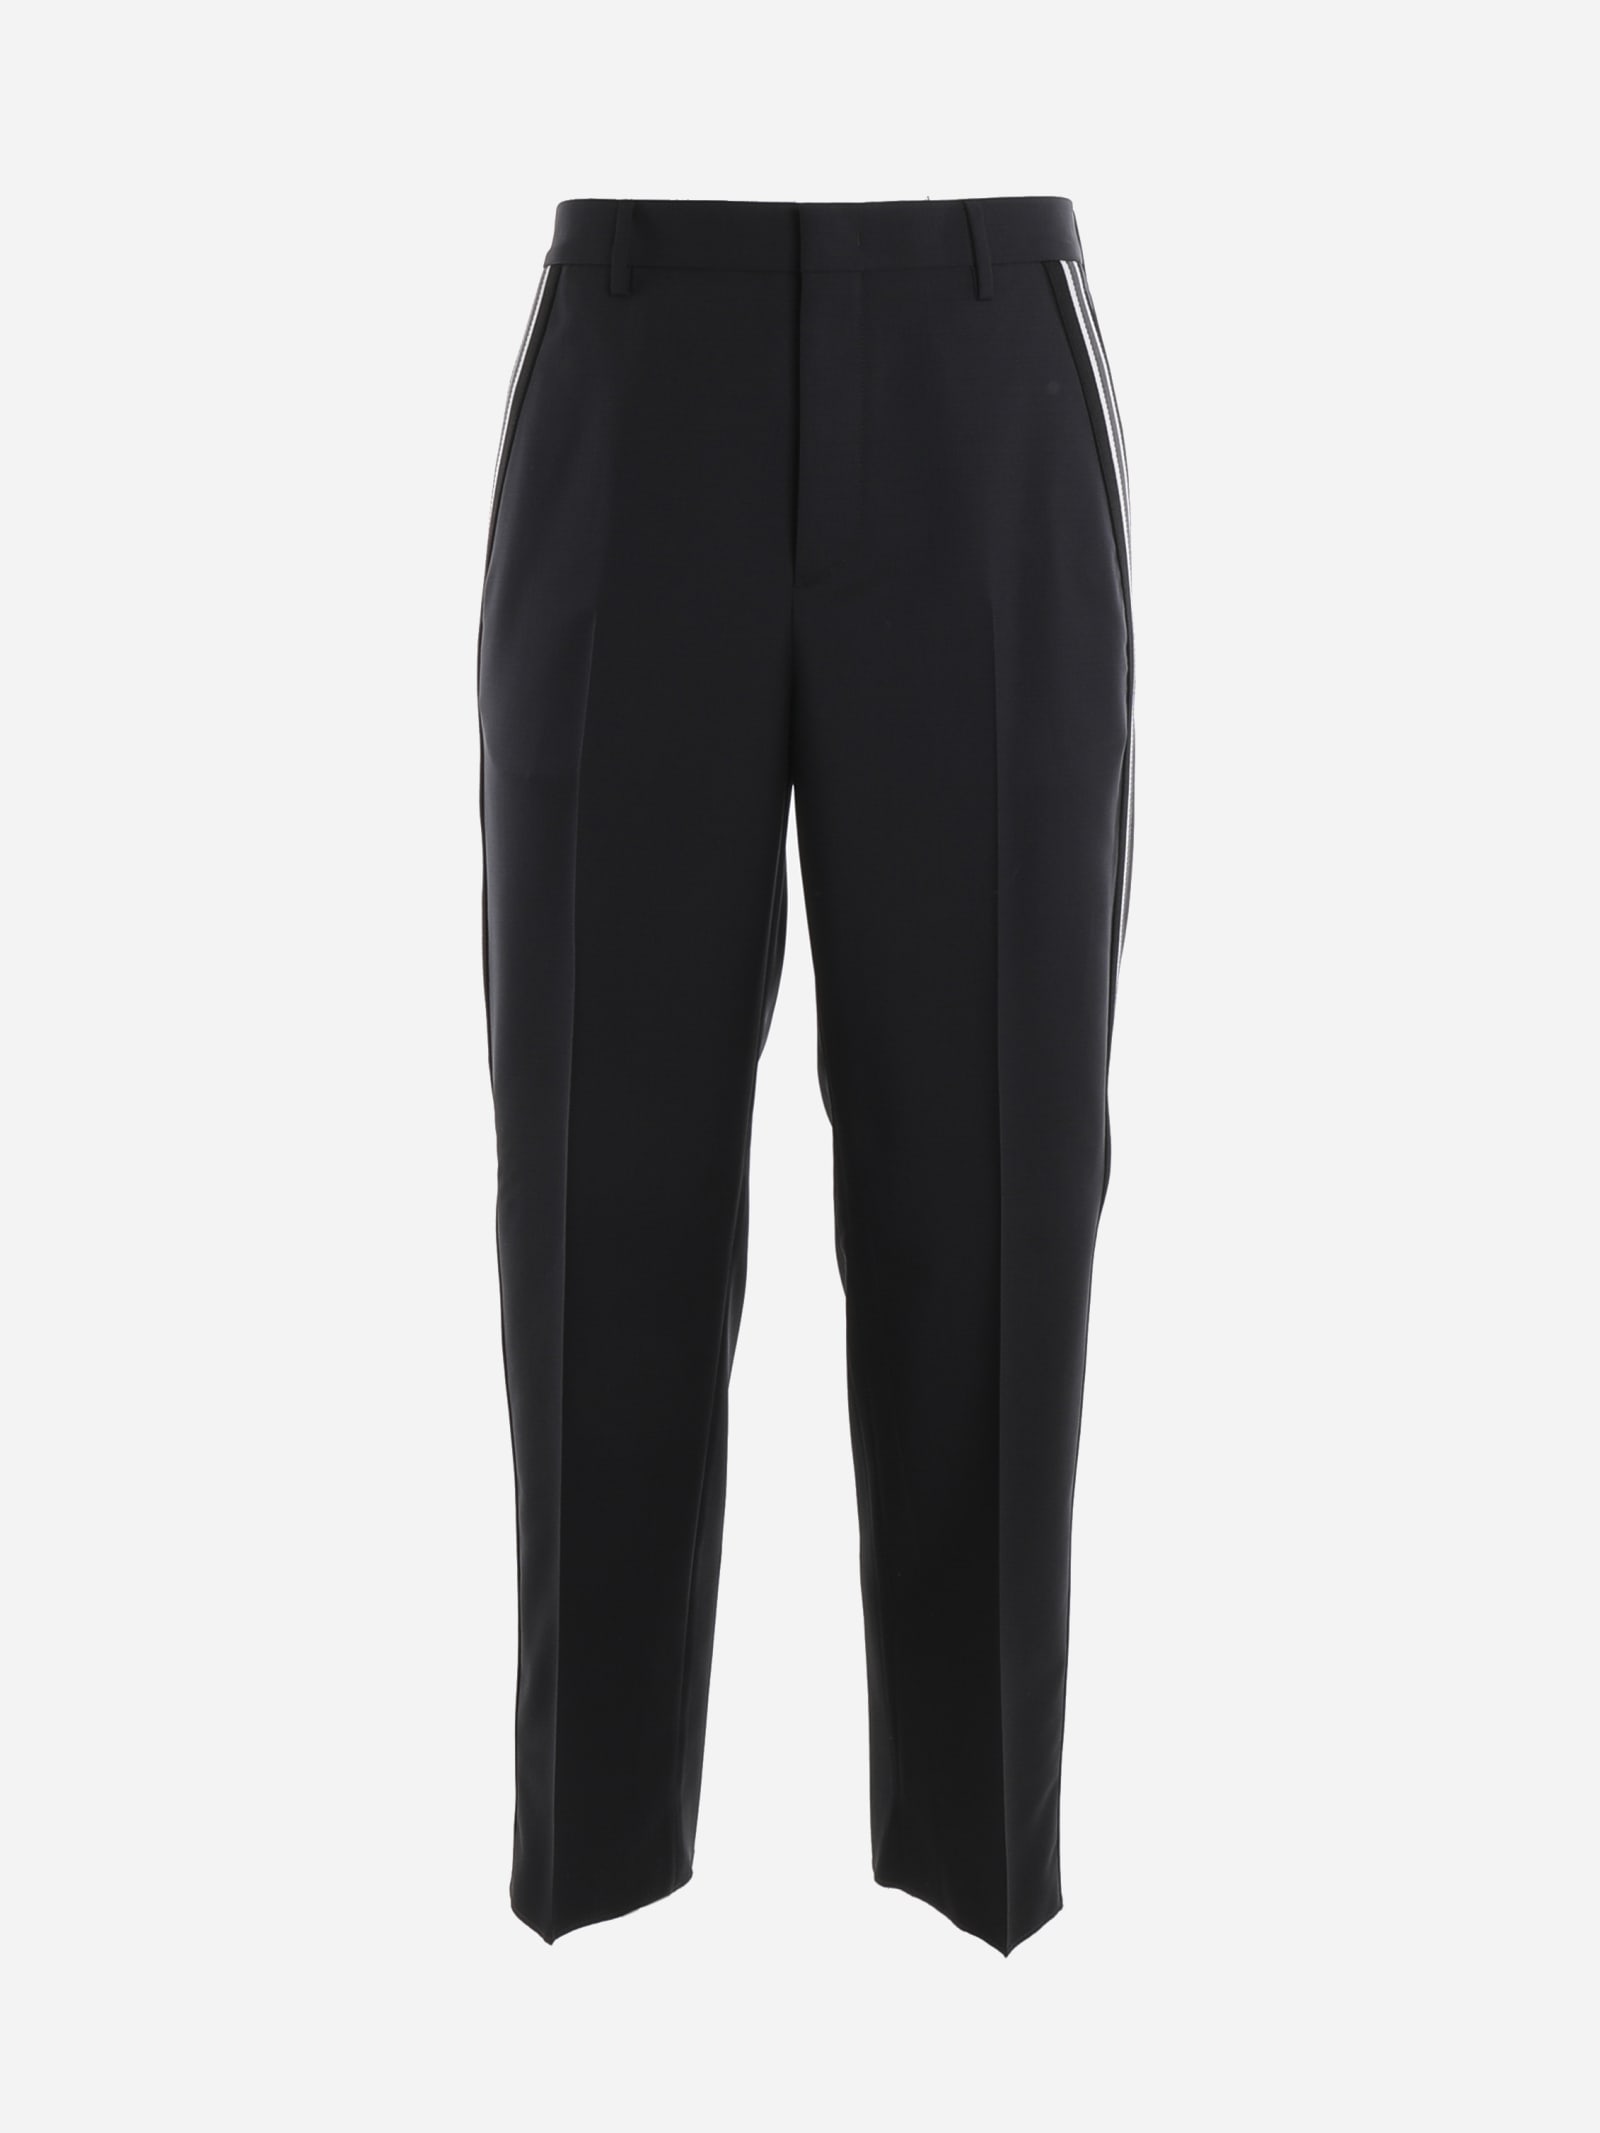 VALENTINO TROUSERS WITH CONTRASTING SIDE BANDS,VV3RBG01 71K37X